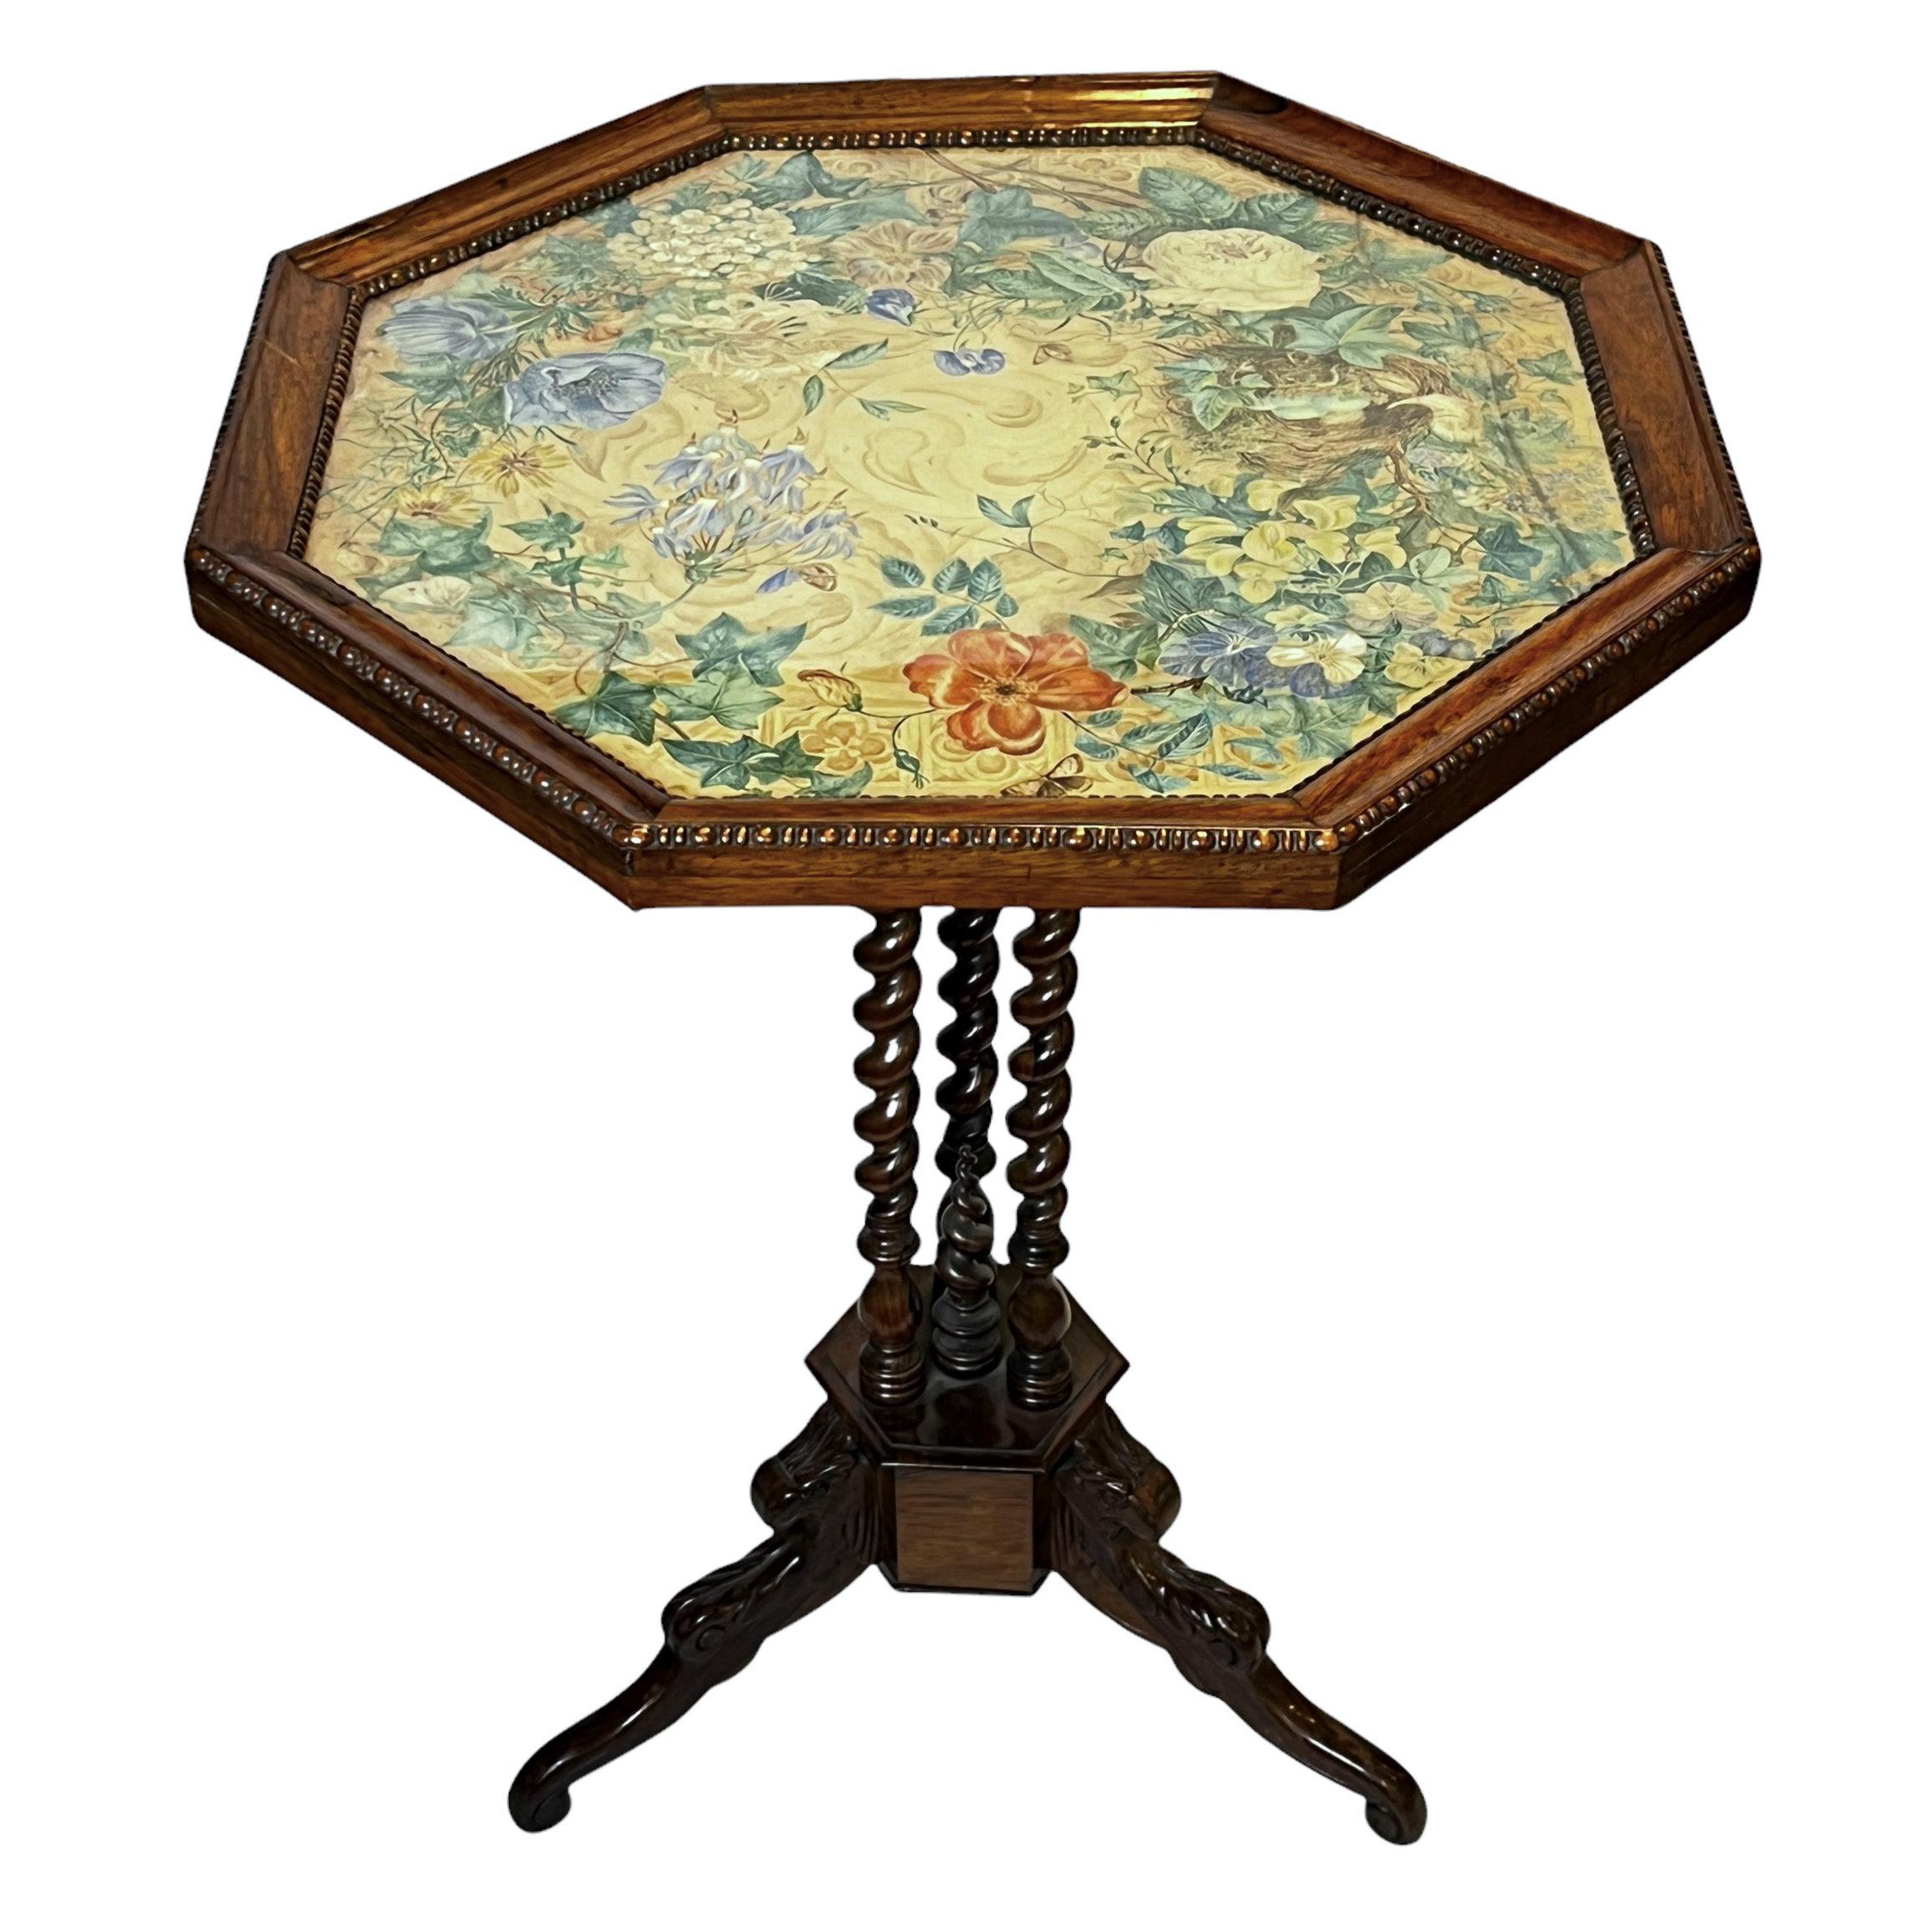 Our antique mahogany tilt-top tripod table with octagonal shaped top features a wonderful hand-painted floral top (apparently painted on fabric or paper) under glass top, with egg-and-dart carved molding around the perimeter, with original locking